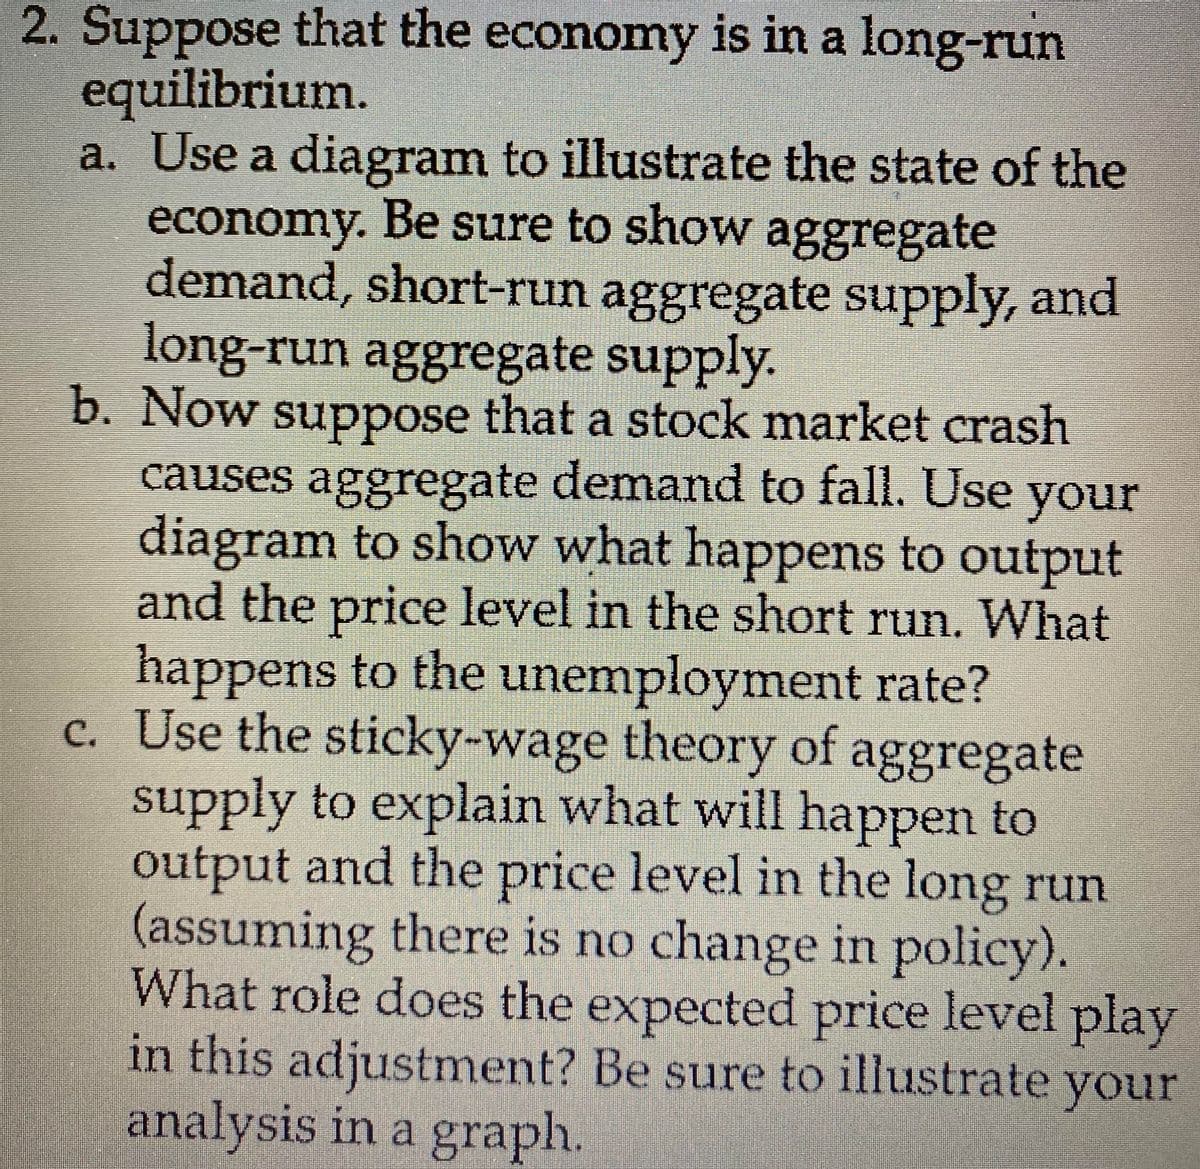 2. Suppose that the economy is in a long-run
equilibrium.
a. Use a diagram to illustrate the state of the
economy. Be sure to show aggregate
demand, short-run aggregate supply, and
long-run aggregate supply.
b. Now suppose that a stock market crash
causes aggregate demand to fall. Use your
diagram to show what happens to output
and the price level in the short run. What
happens to the unemployment rate?
c. Use the sticky-wage theory of aggregate
supply to explain what will happen to
output and the price level in the long run
(assuming there is no change in policy).
What role does the expected price level play
in this adjustment? Be sure to illustrate your
analysis in a graph.
